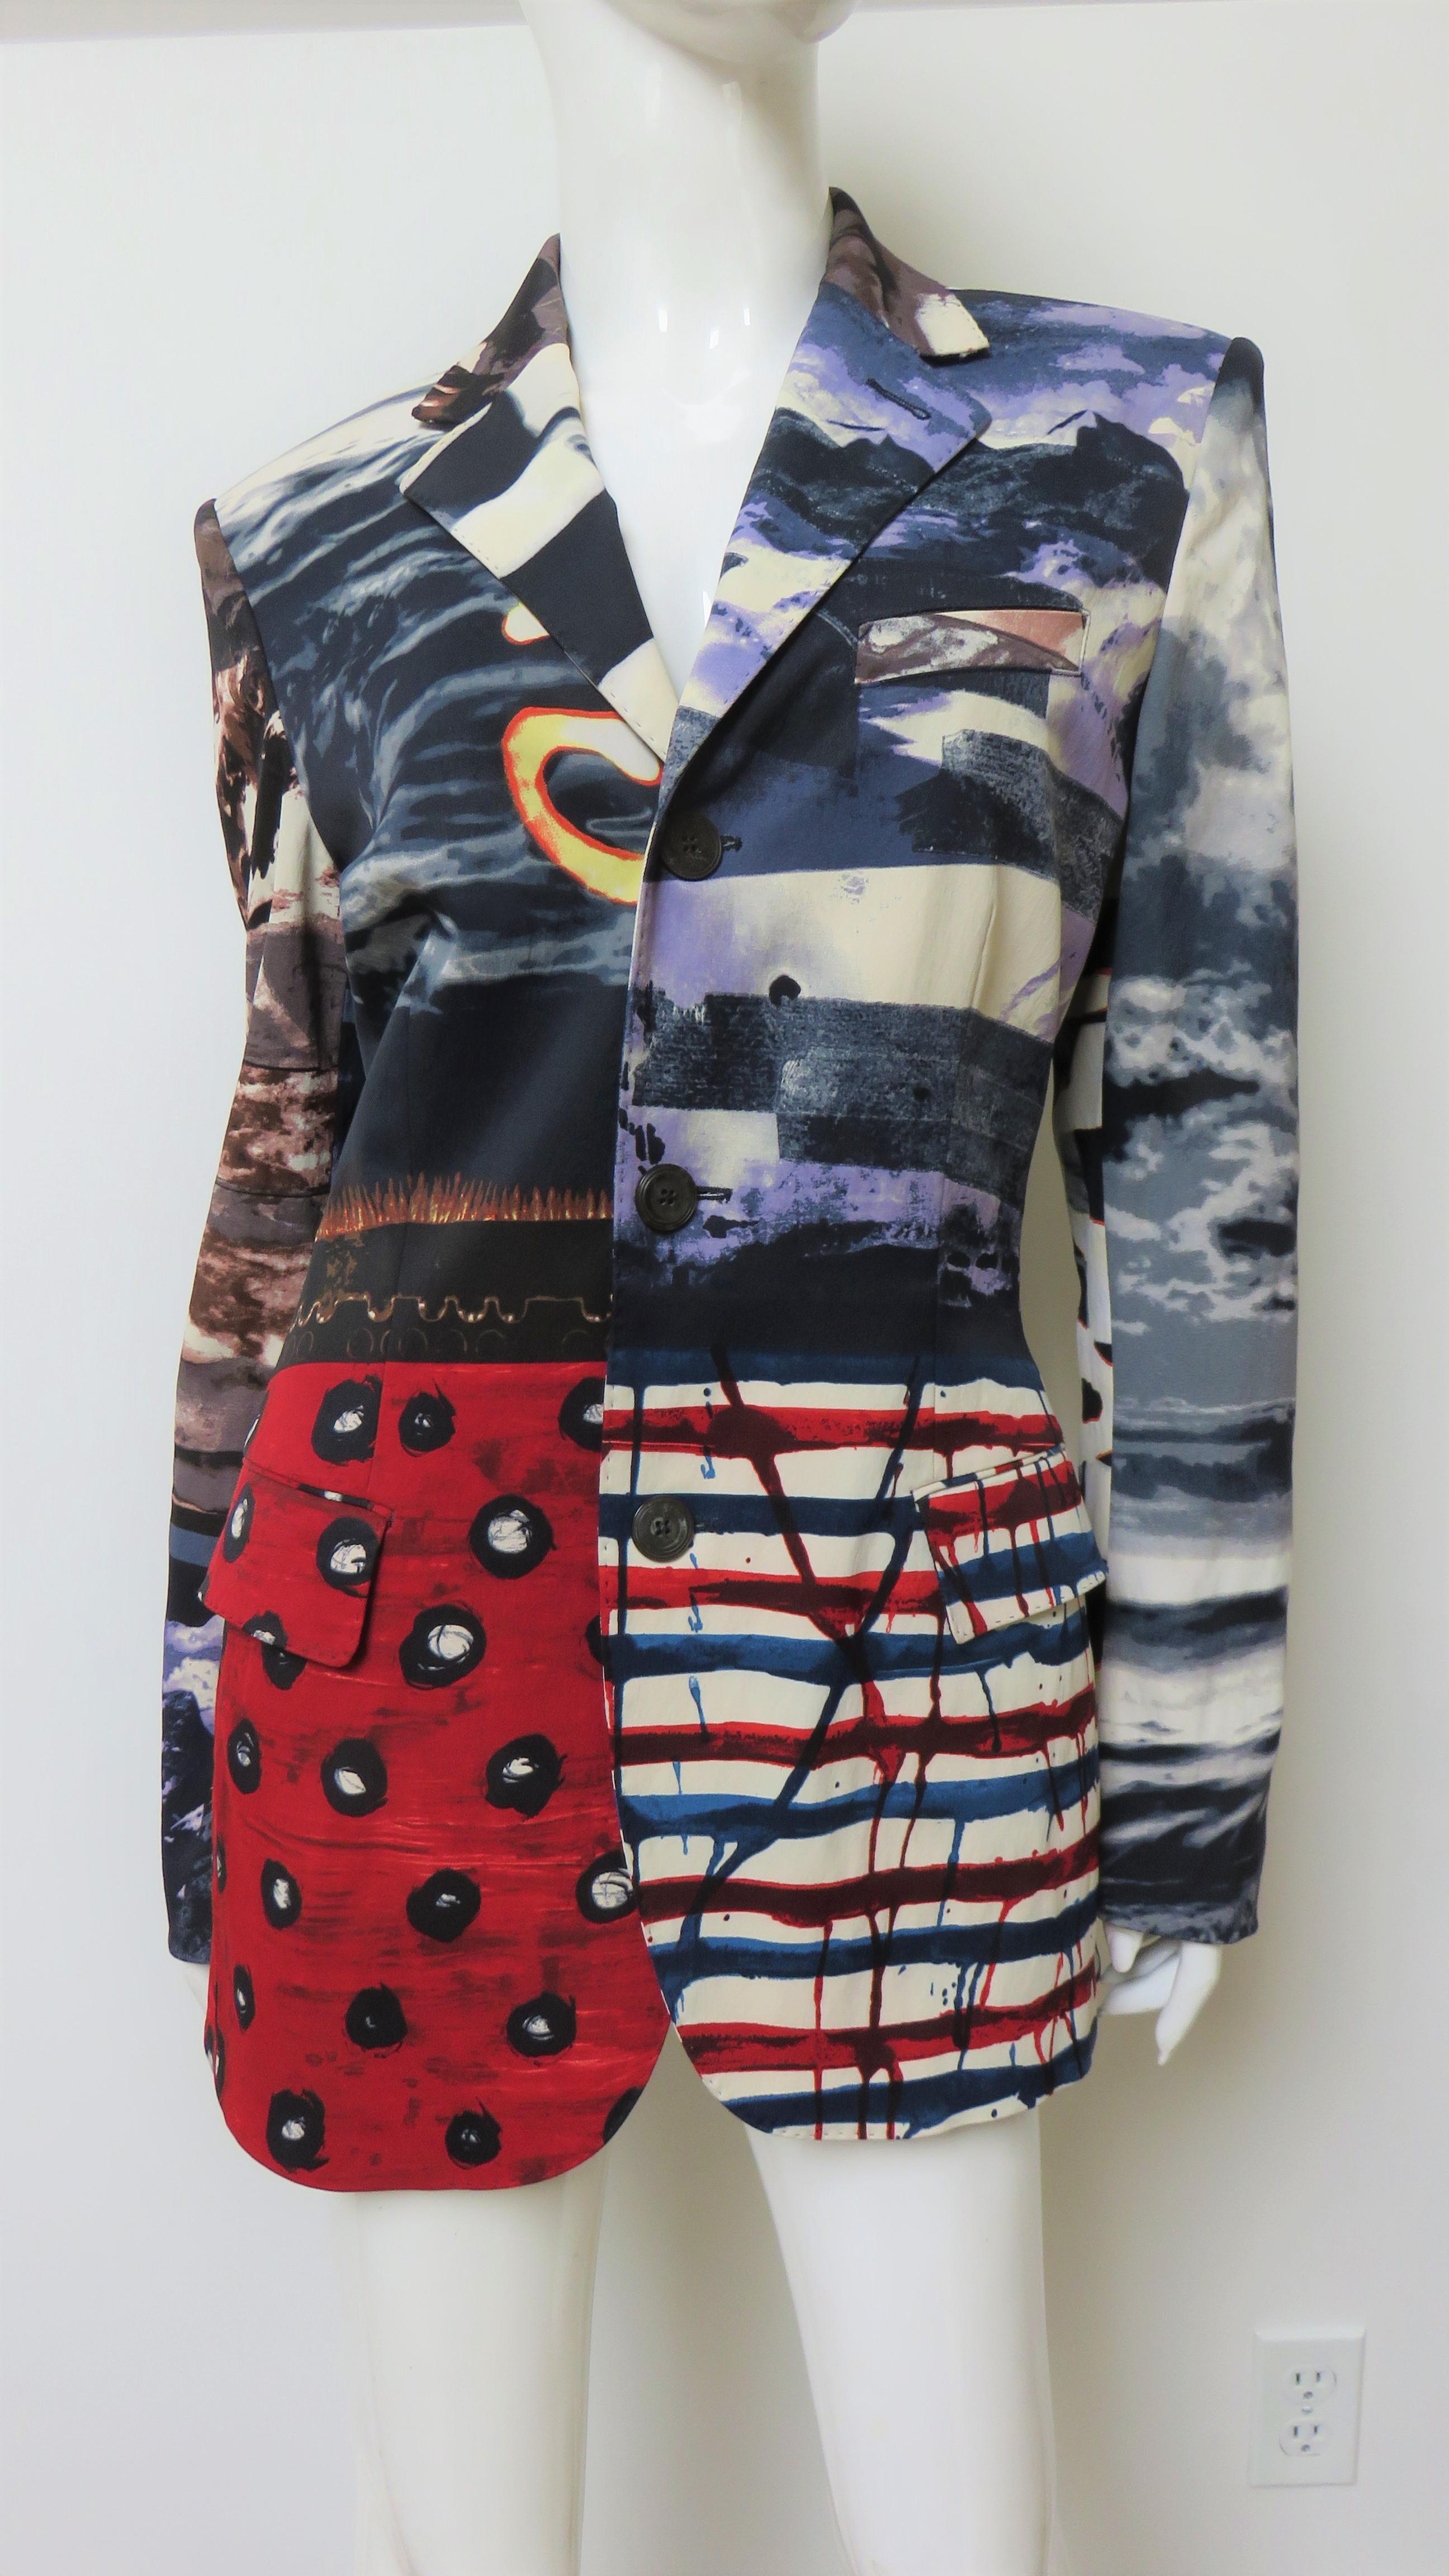 A gorgeous patchwork multi pattern jacket from Jean Paul Gaultier in a blue, red, off white and black abstract pattern and photo print.  It has a hand stitched lapel collar, 2 front flap pockets and center front and cuff button closing.  The top